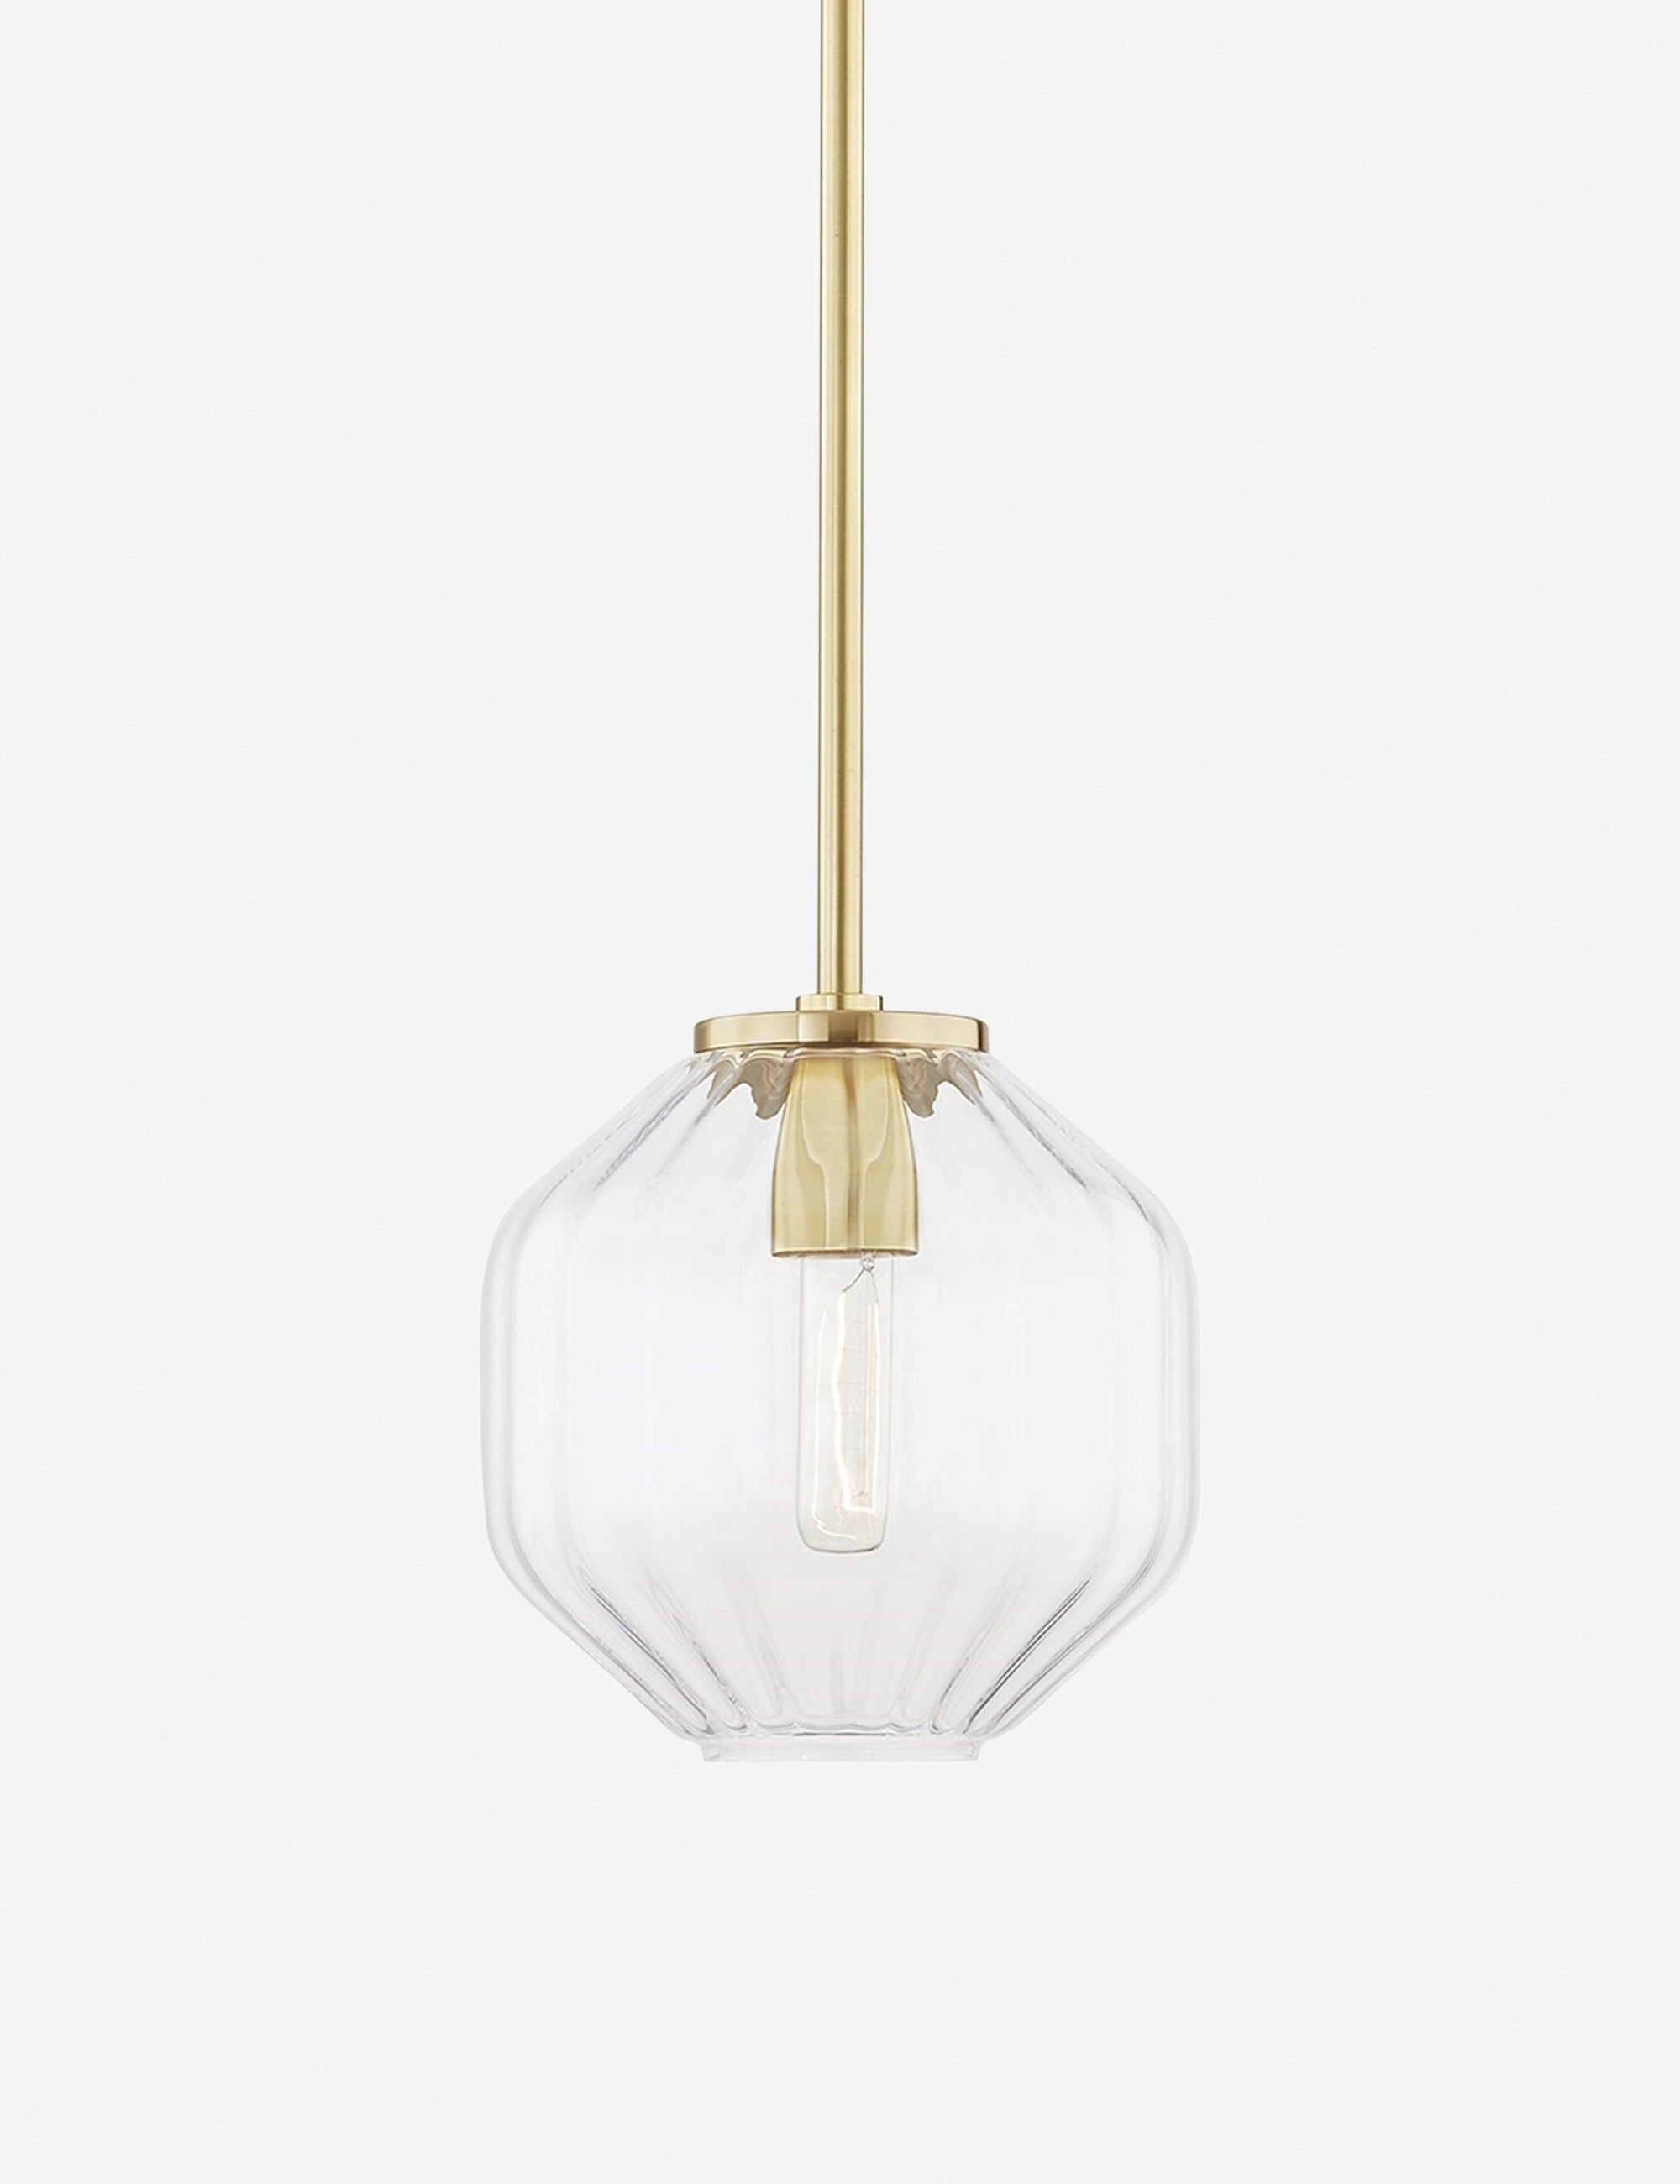 Aged Brass Globe Pendant Light with Pleated Clear Glass